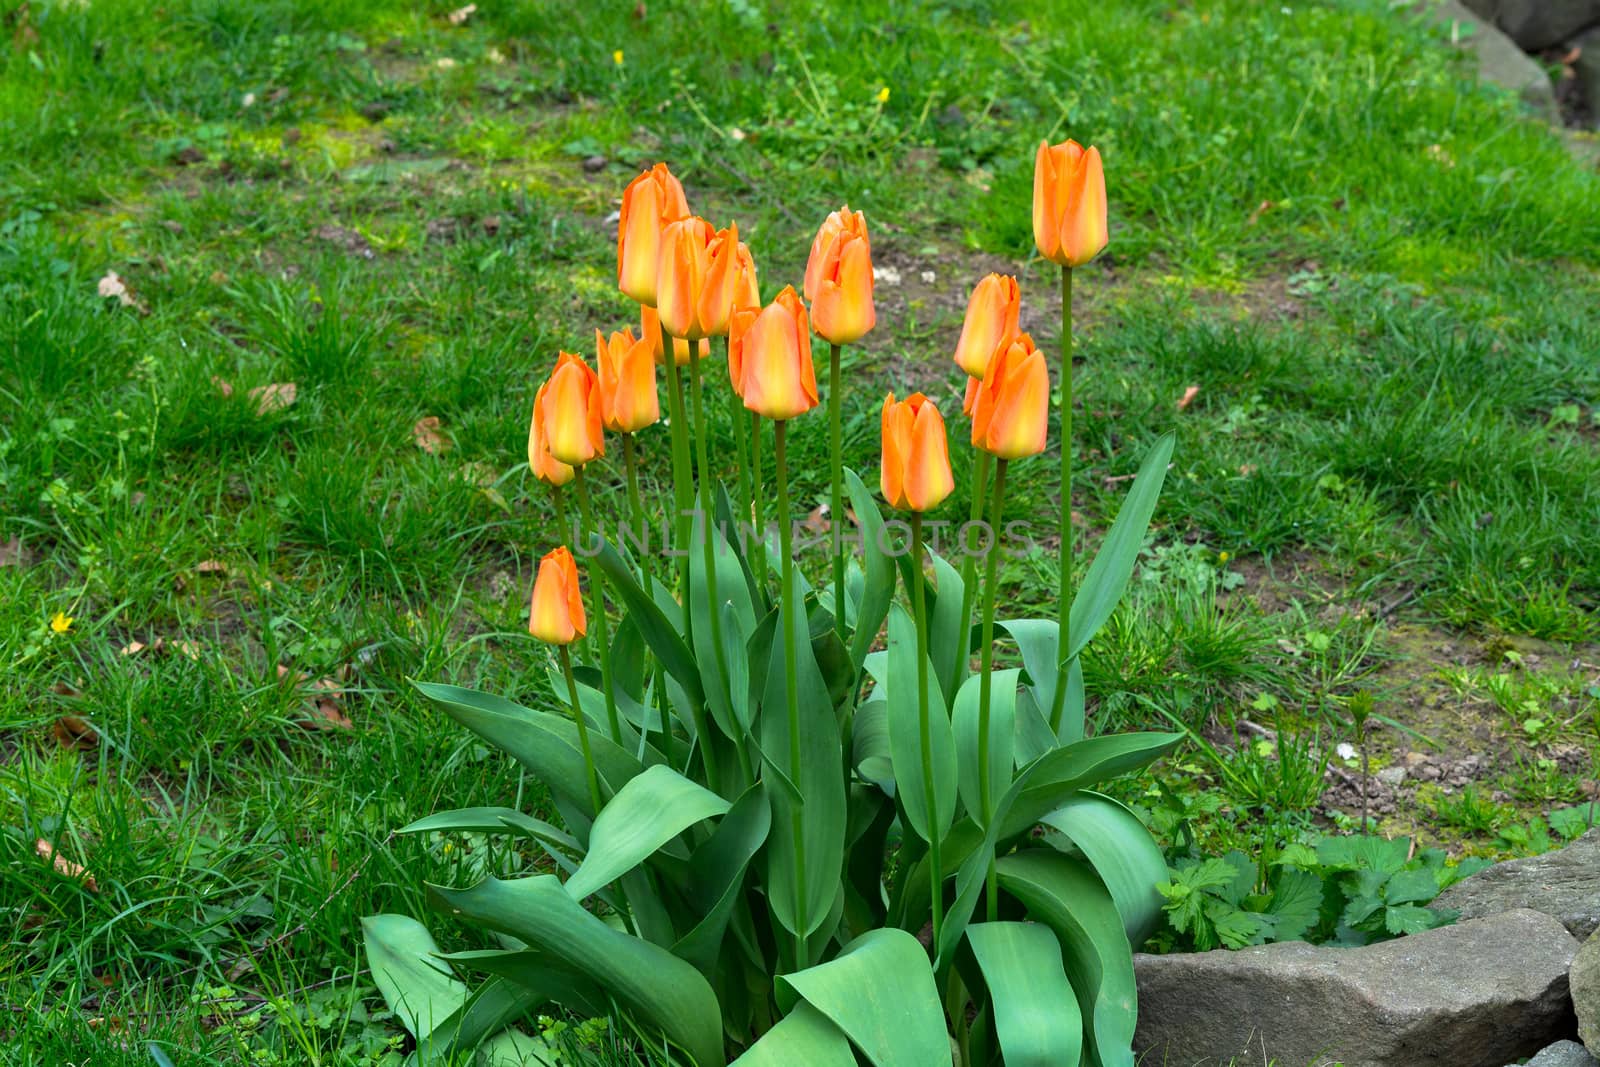 Red and orange tulips                  by JFsPic